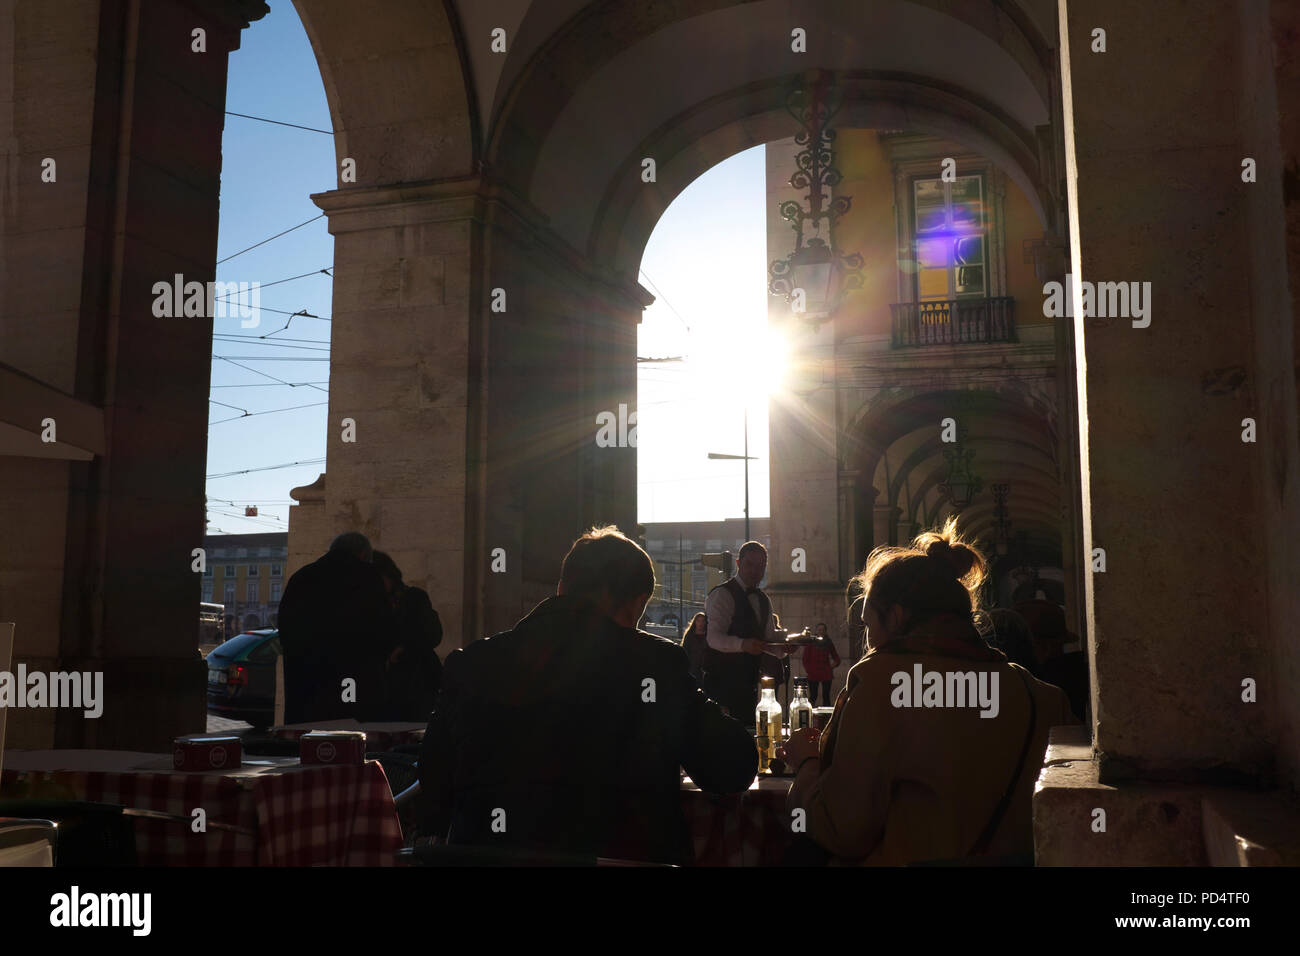 A cafe in Lisbon, Portugal Stock Photo